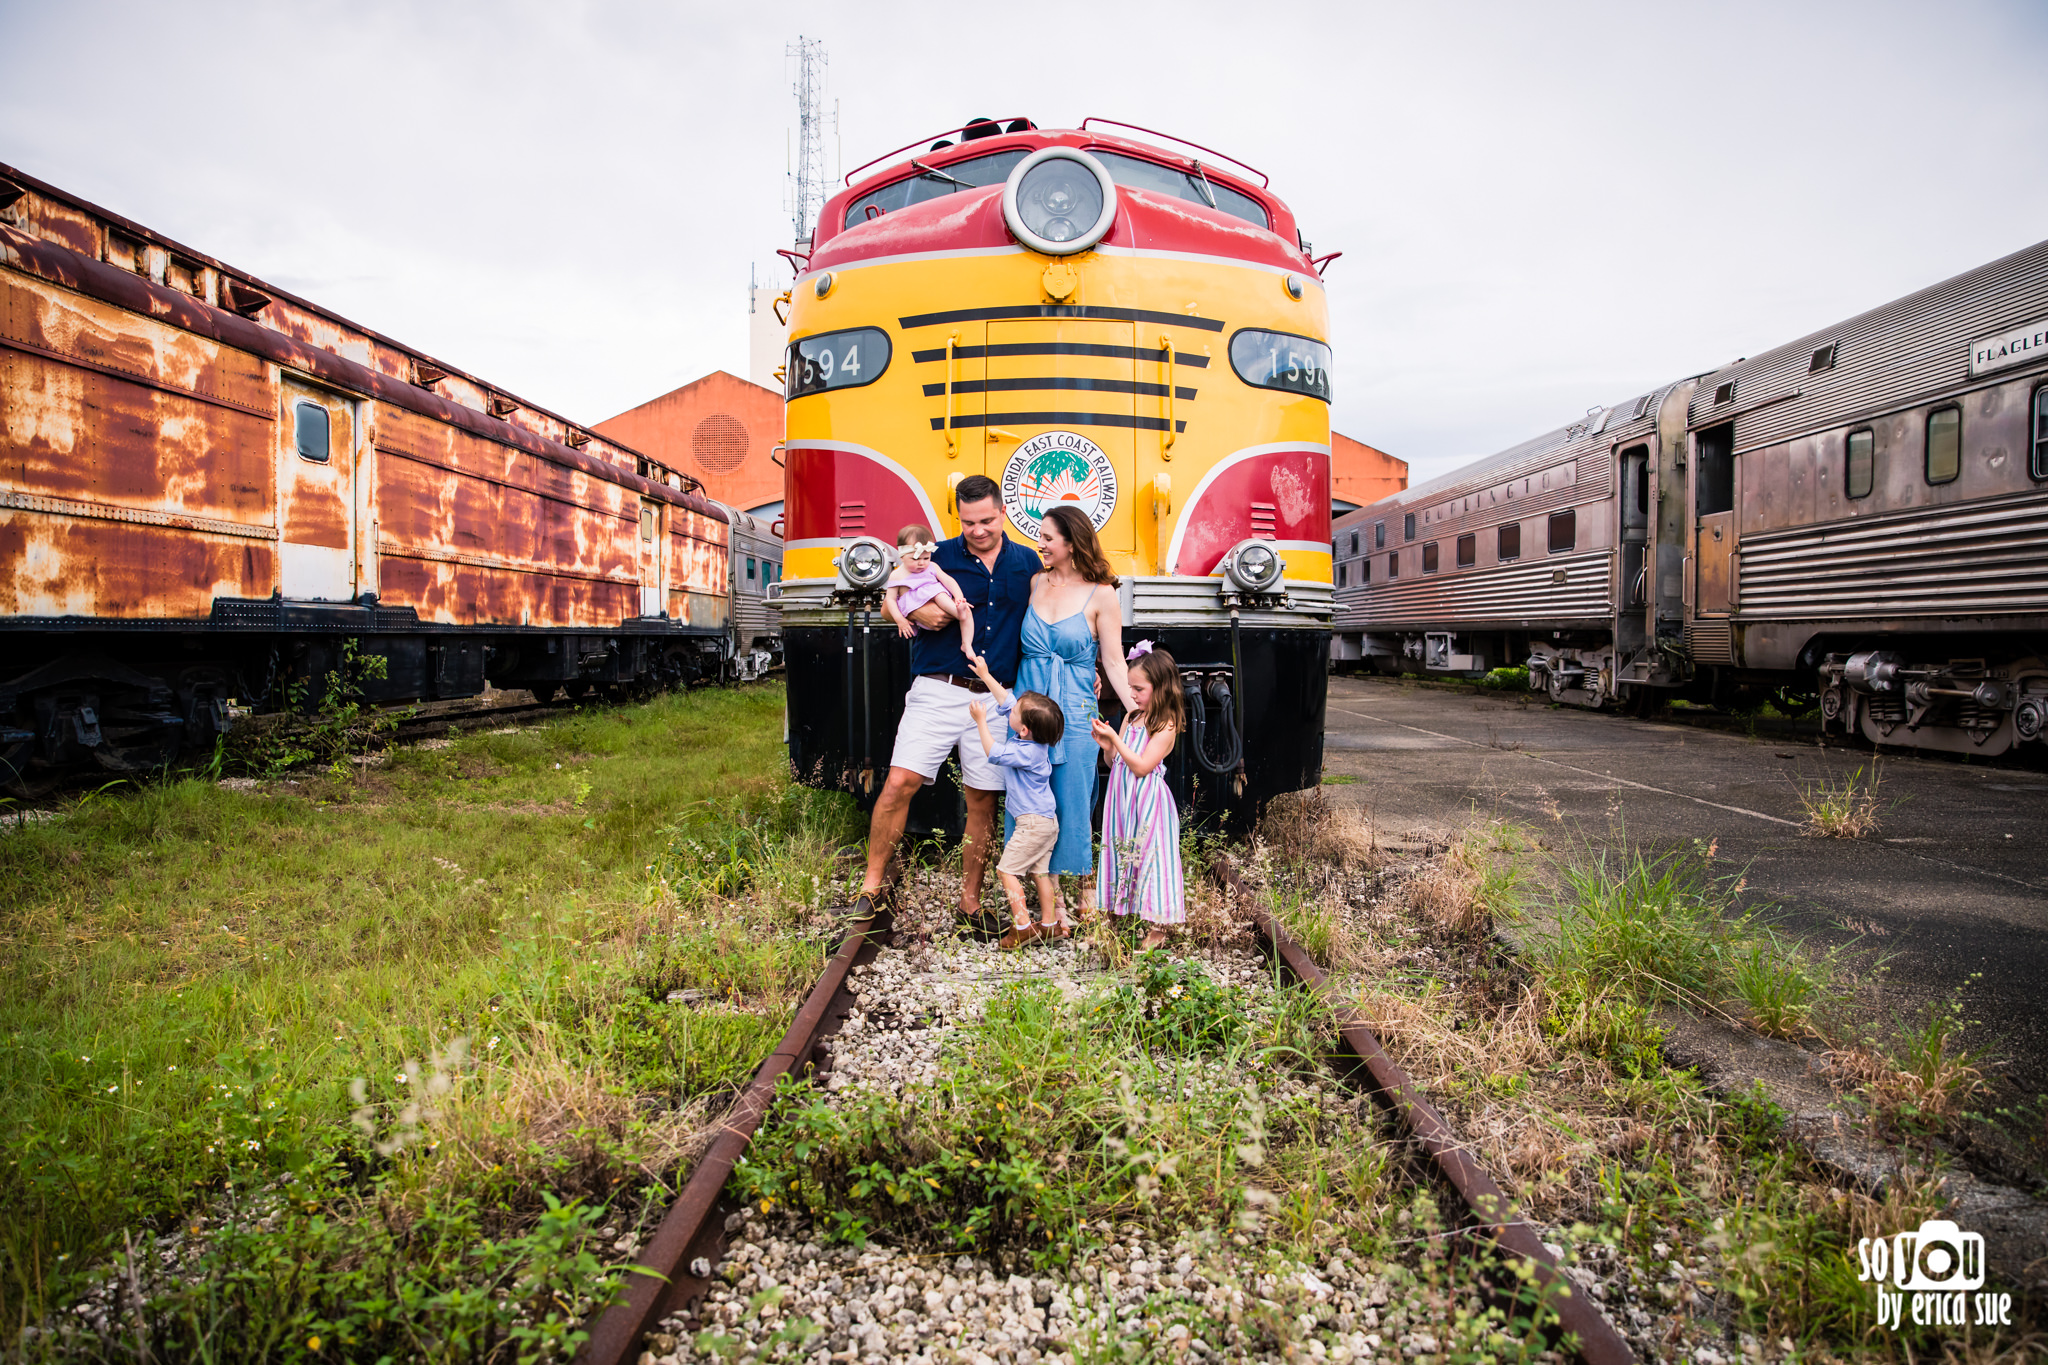 so-you-by-erica-sue-gold-coast-railroad-museum-miami-family-photo-shoot-session-7475.JPG